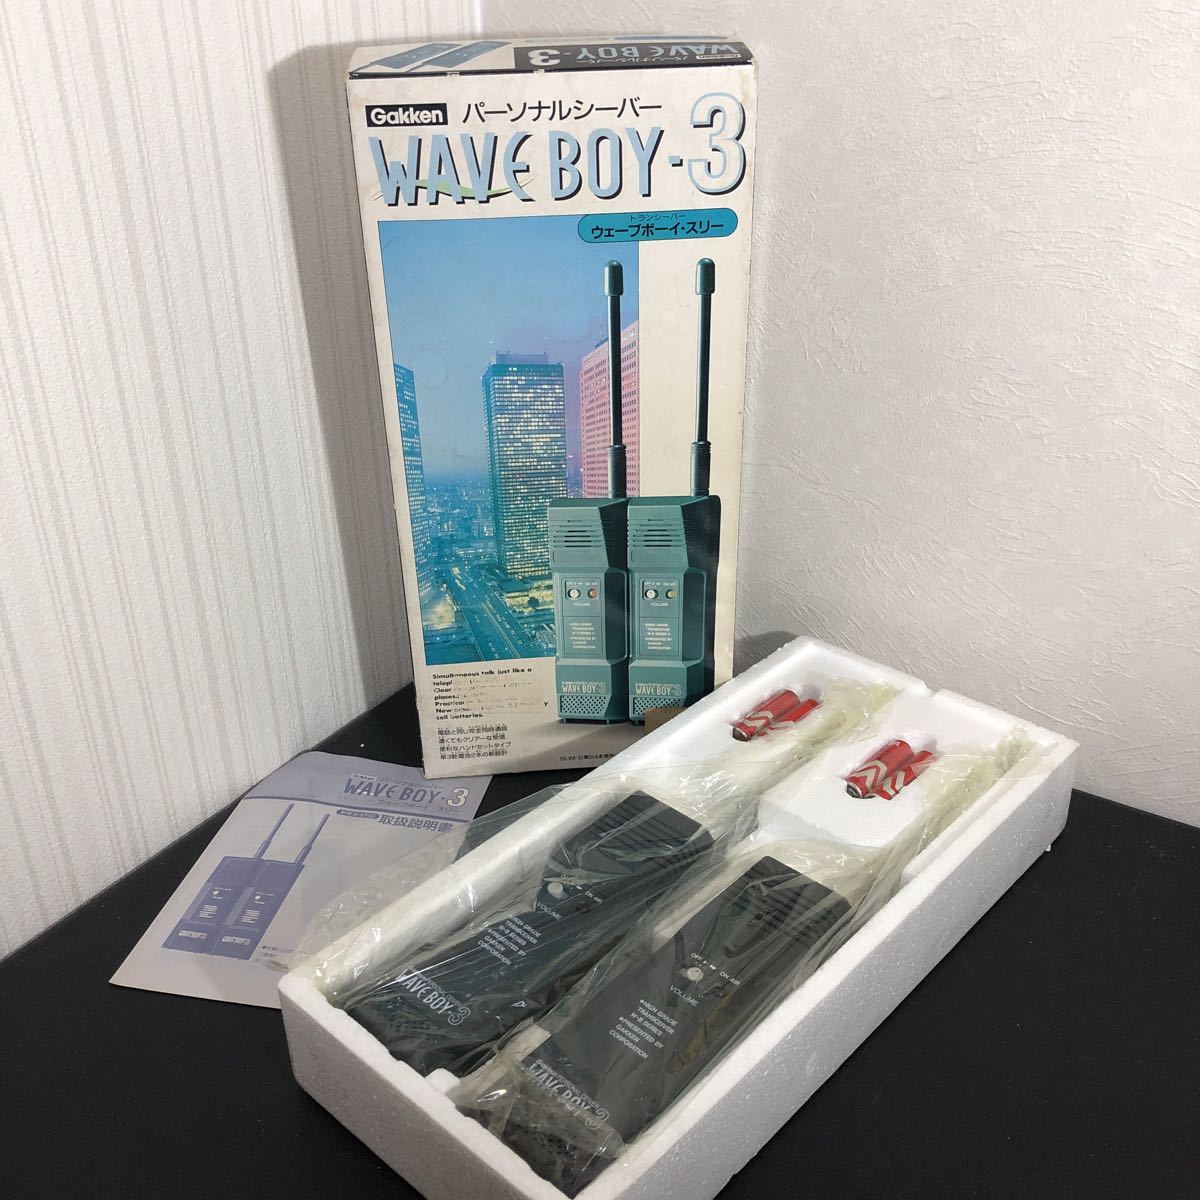 * personal si- bar wave Boy 3 transceiver Gakken Showa Retro toy toy electrification verification settled defect equipped 